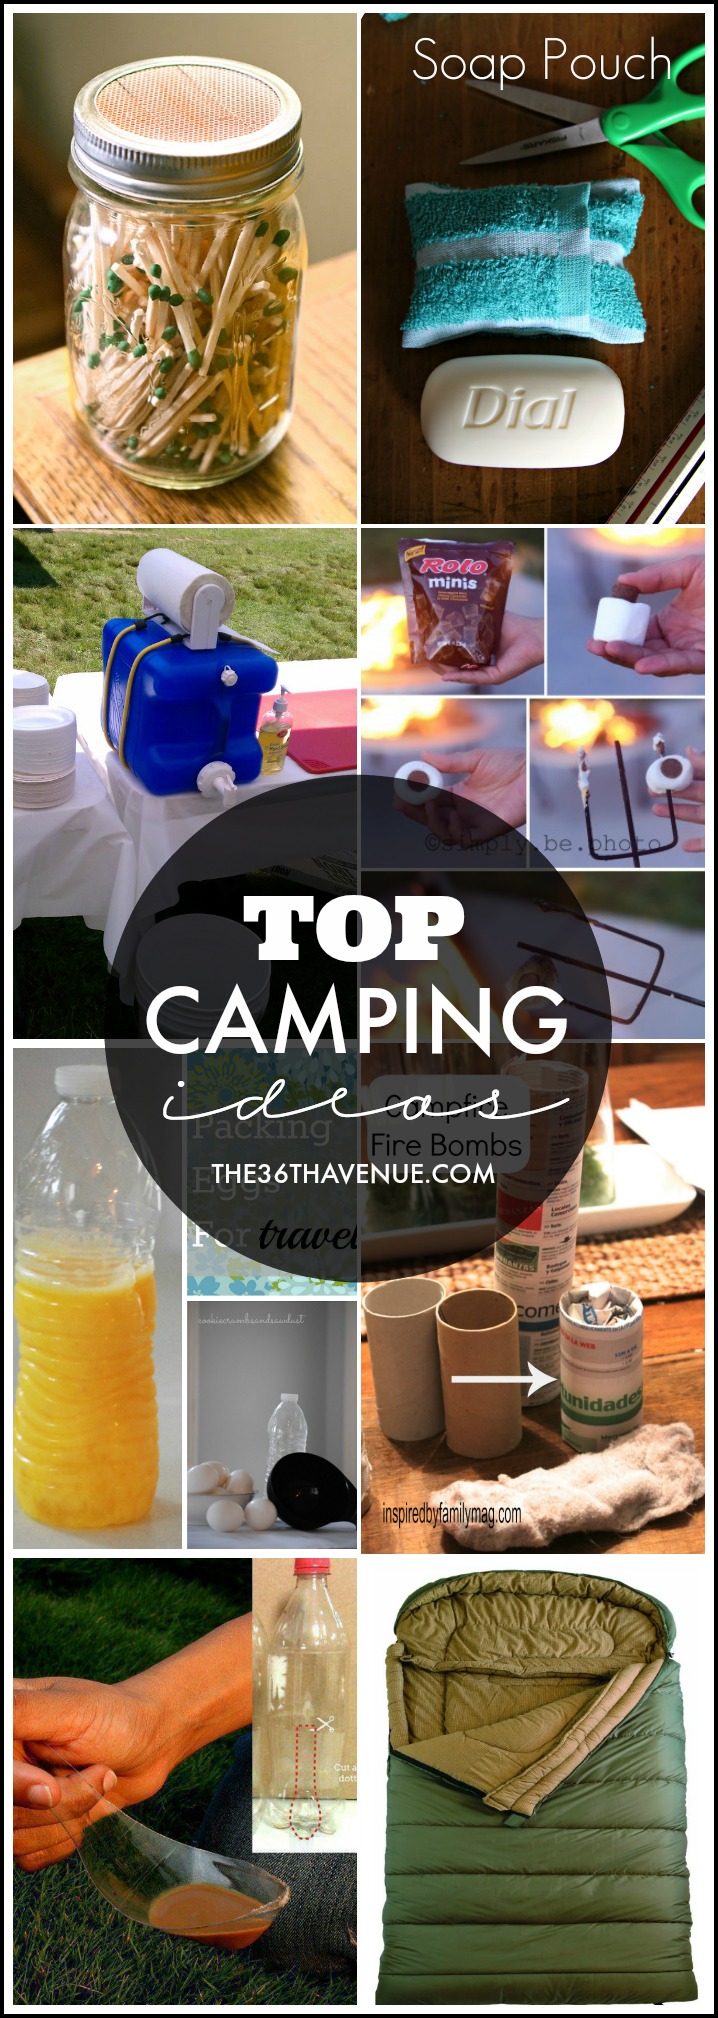 Top Camping Ideas at the36thavenue.com